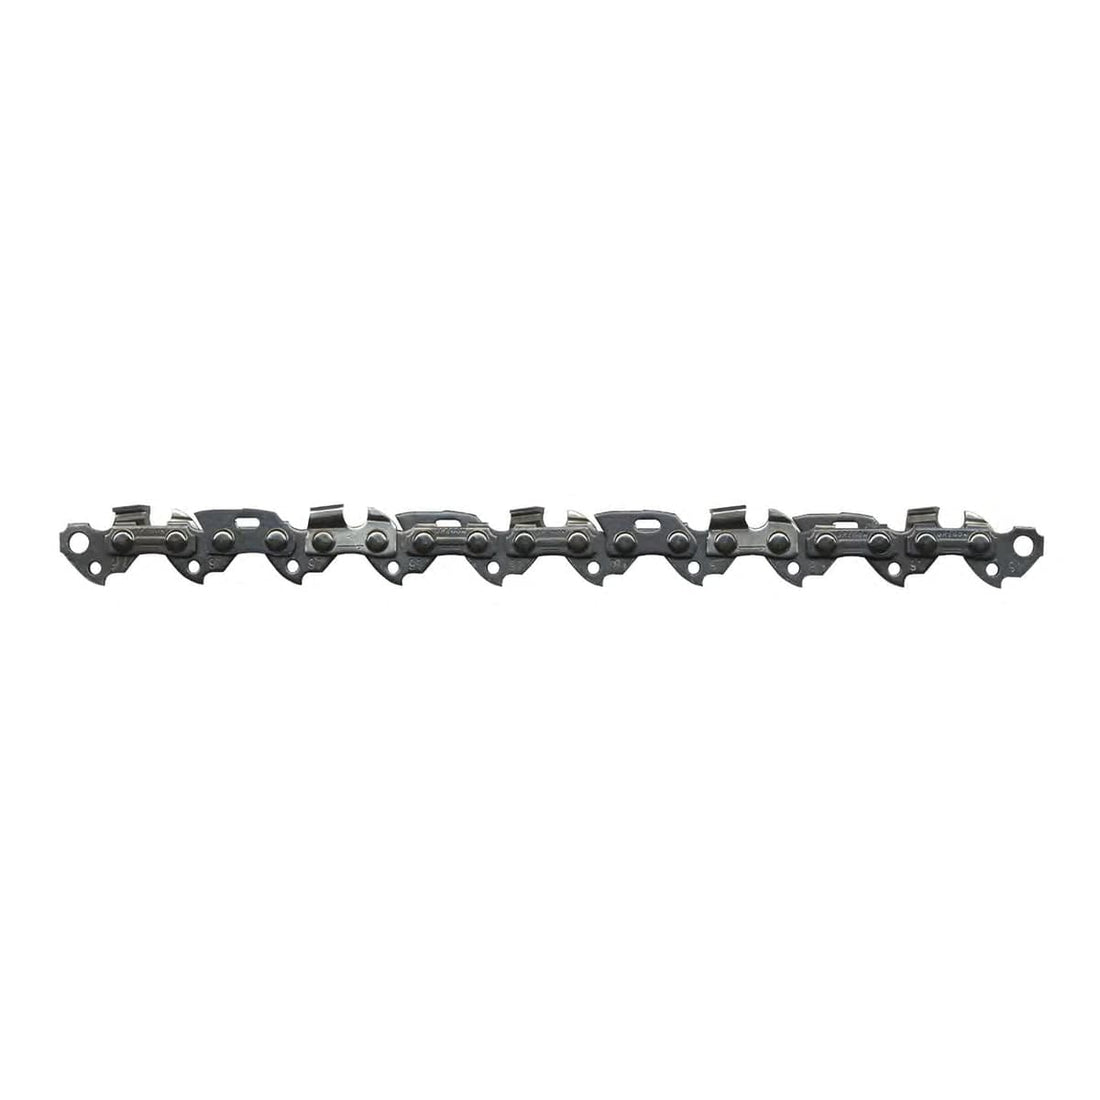 REPLACEMENT CHAIN FOR CHAINSAW 'D91P-040E OREGON